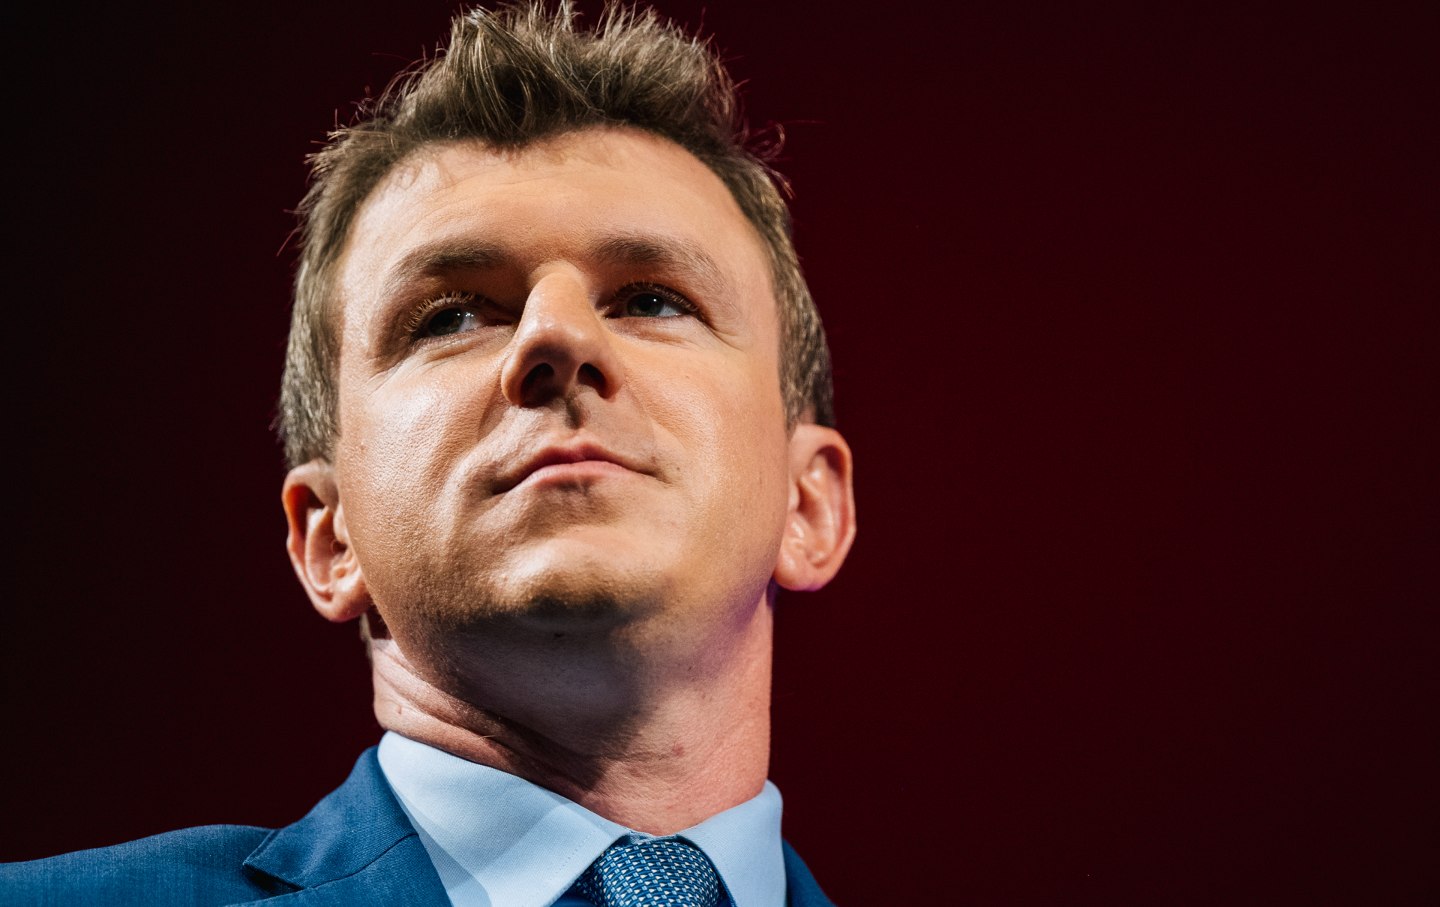 Project Veritas founder James O'Keefe at the 2021 Conservative Political Action Conference in Dallas, Texas.